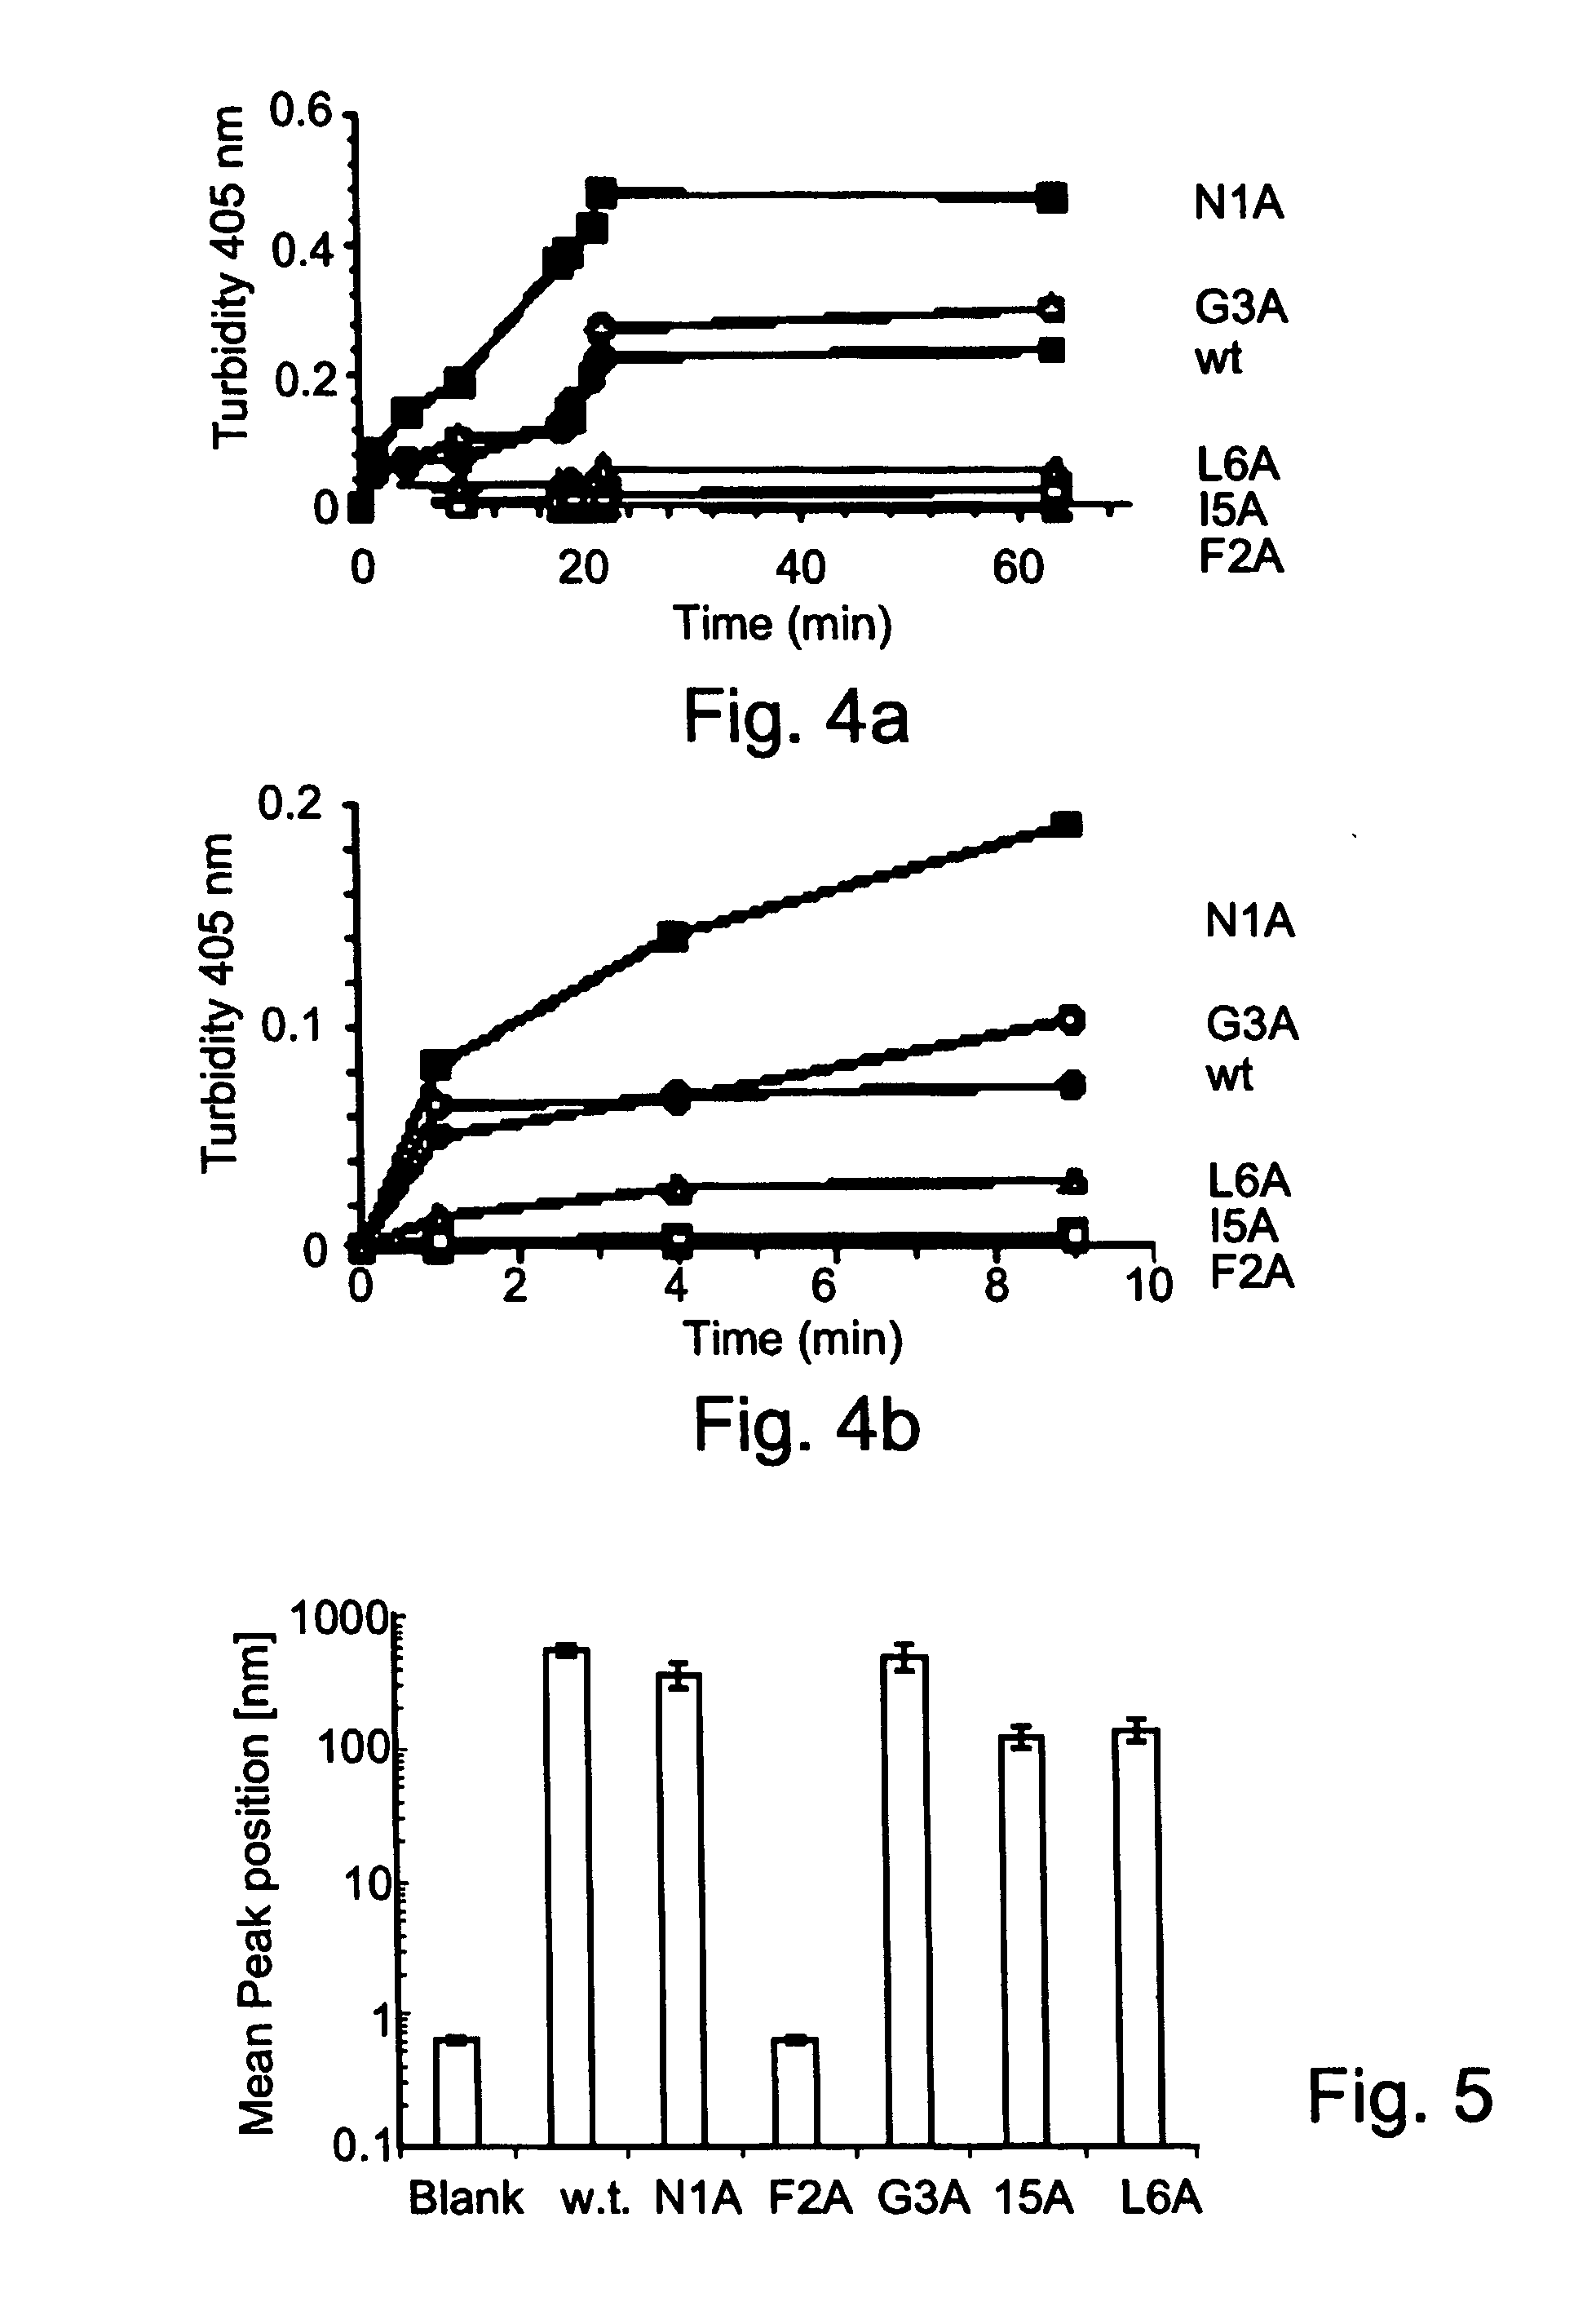 Peptides antibodies directed thereagainst and methods using same for diagnosing and treating amyloid-associated diseases